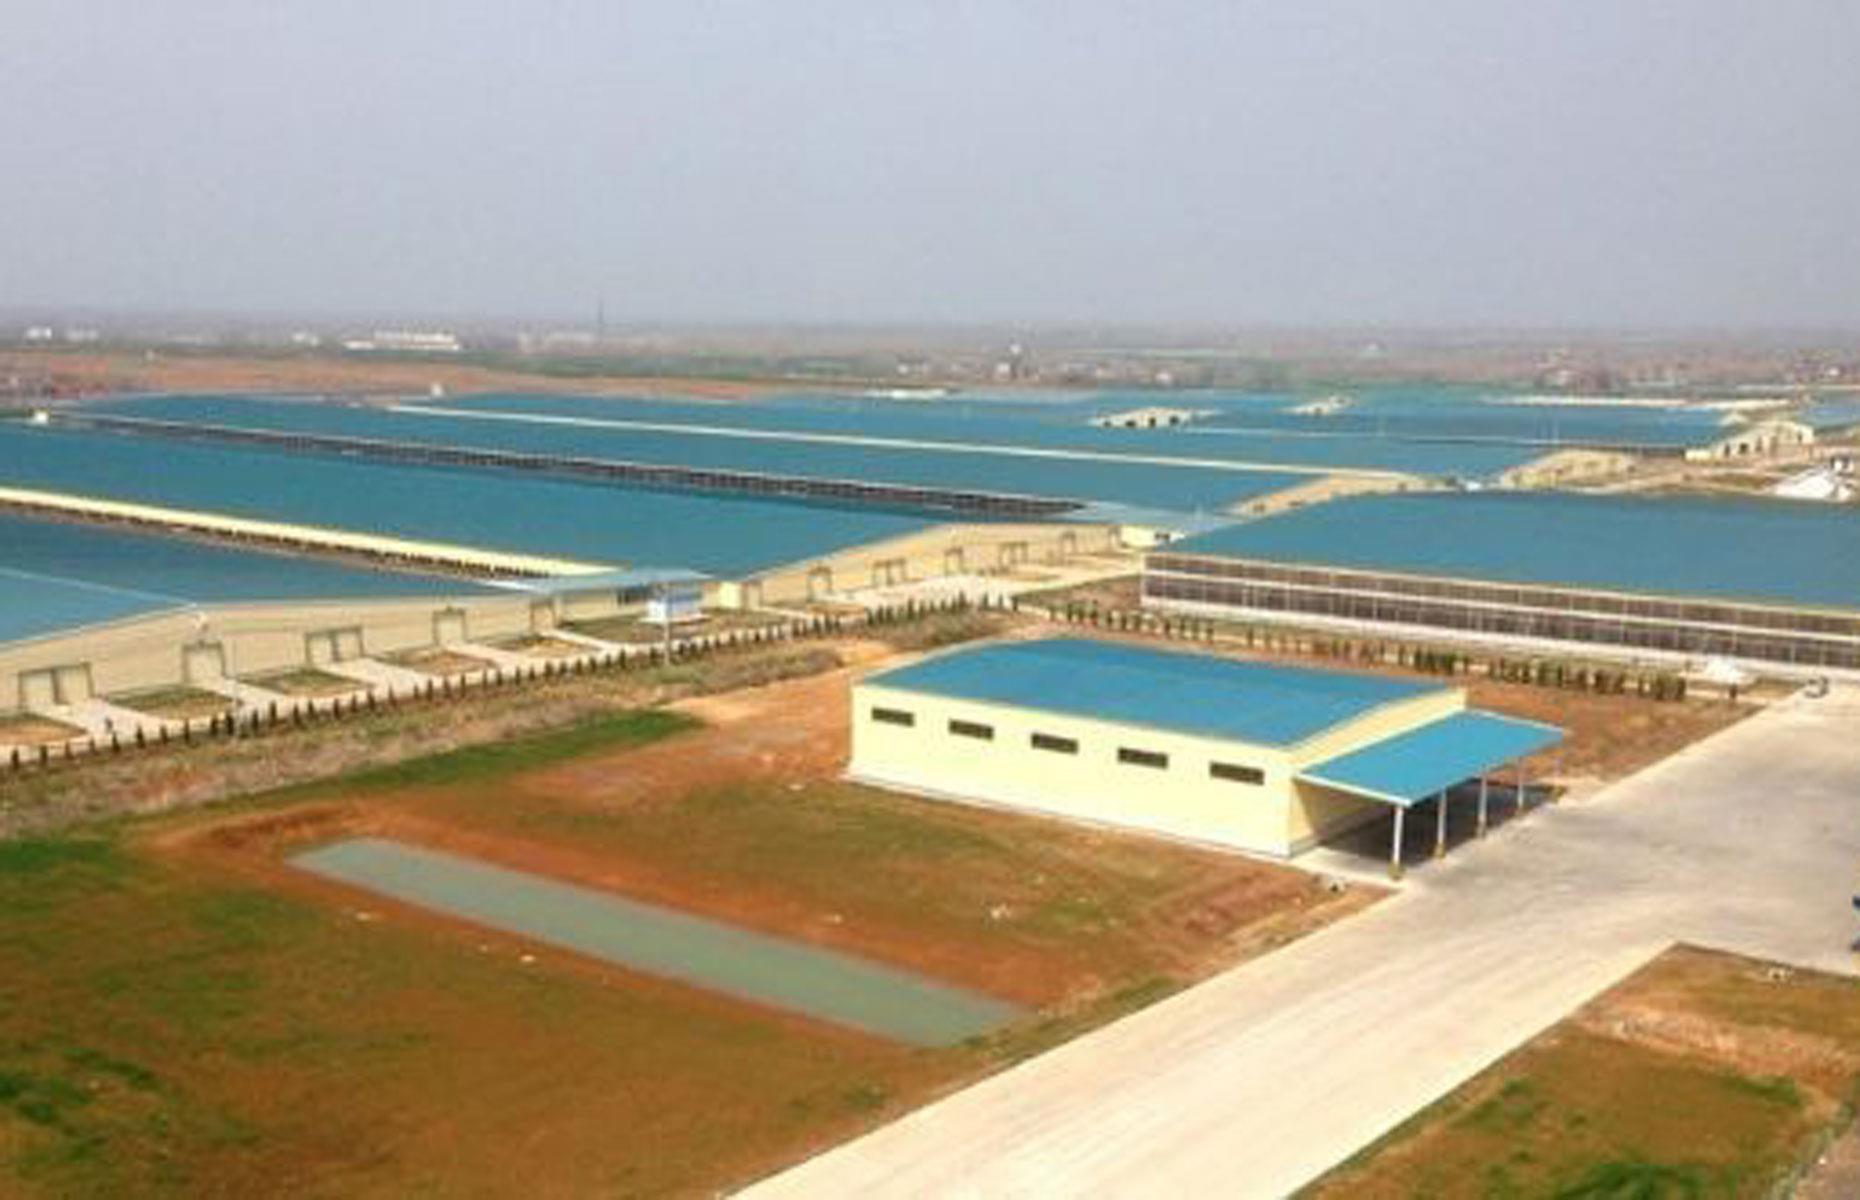 Joint 5. Zhongding Dairy Farming & Severny Bur shareholders: 9.1 million hectares